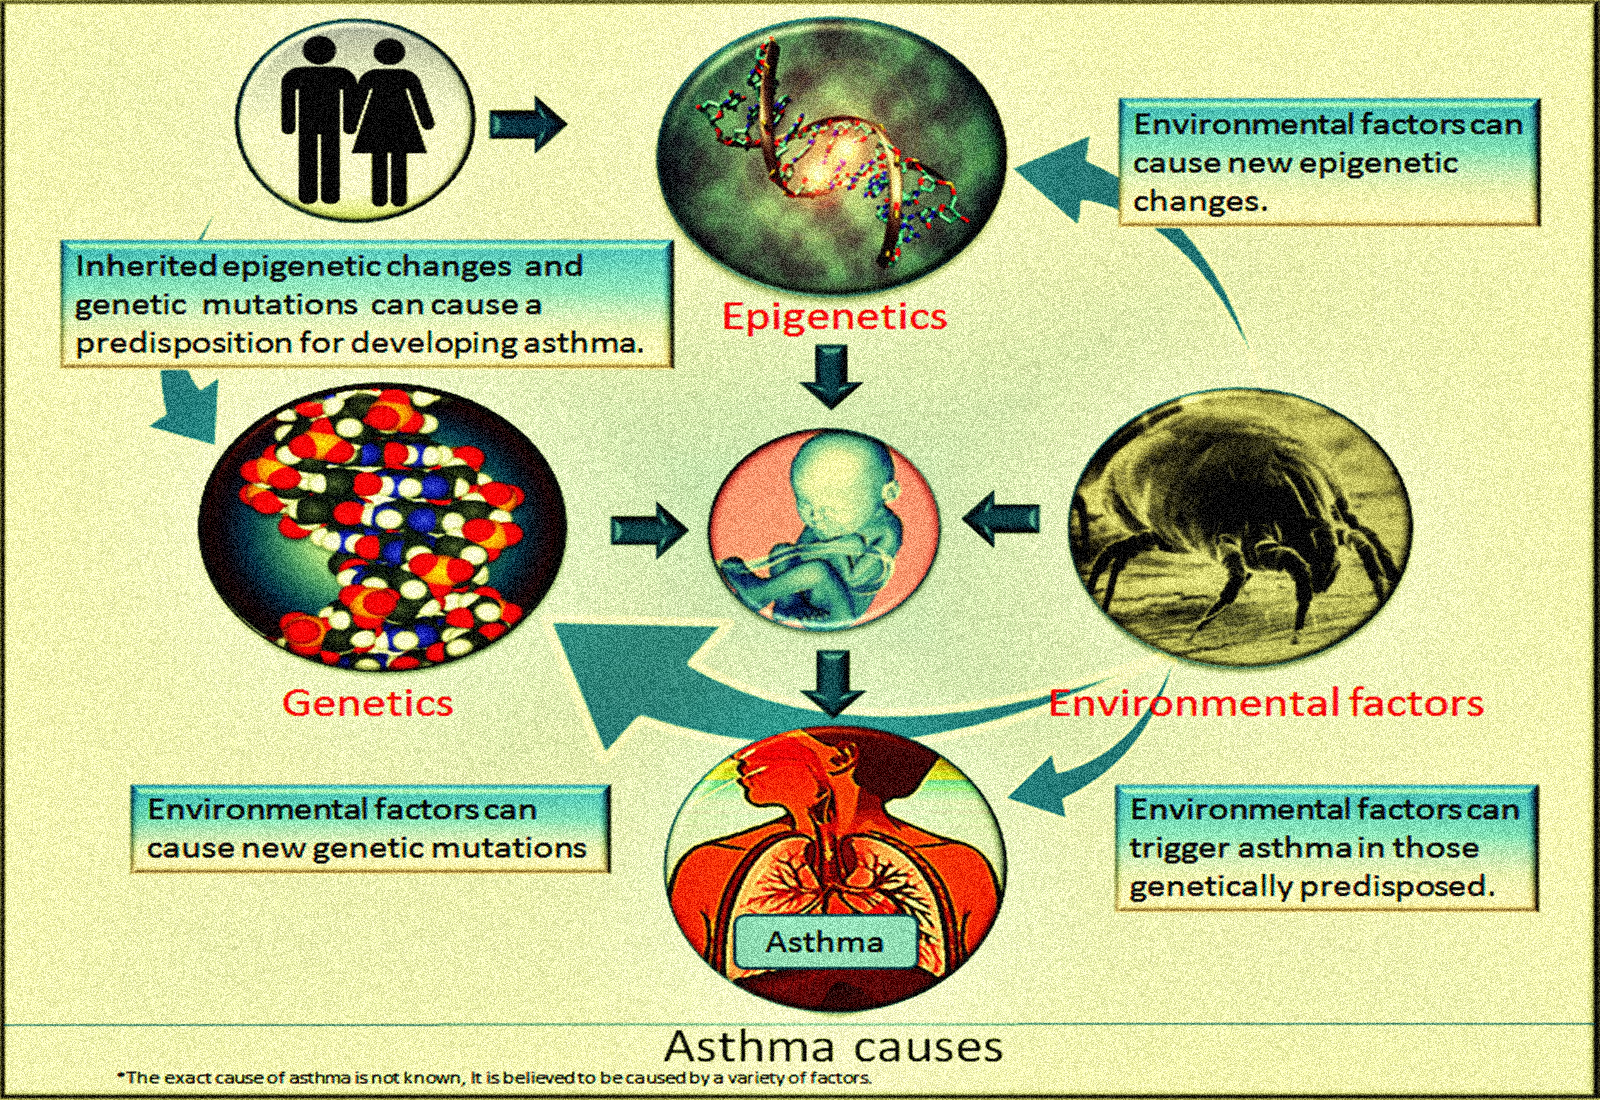 Medicine Health And You: What is Asthma and How is it Caused?